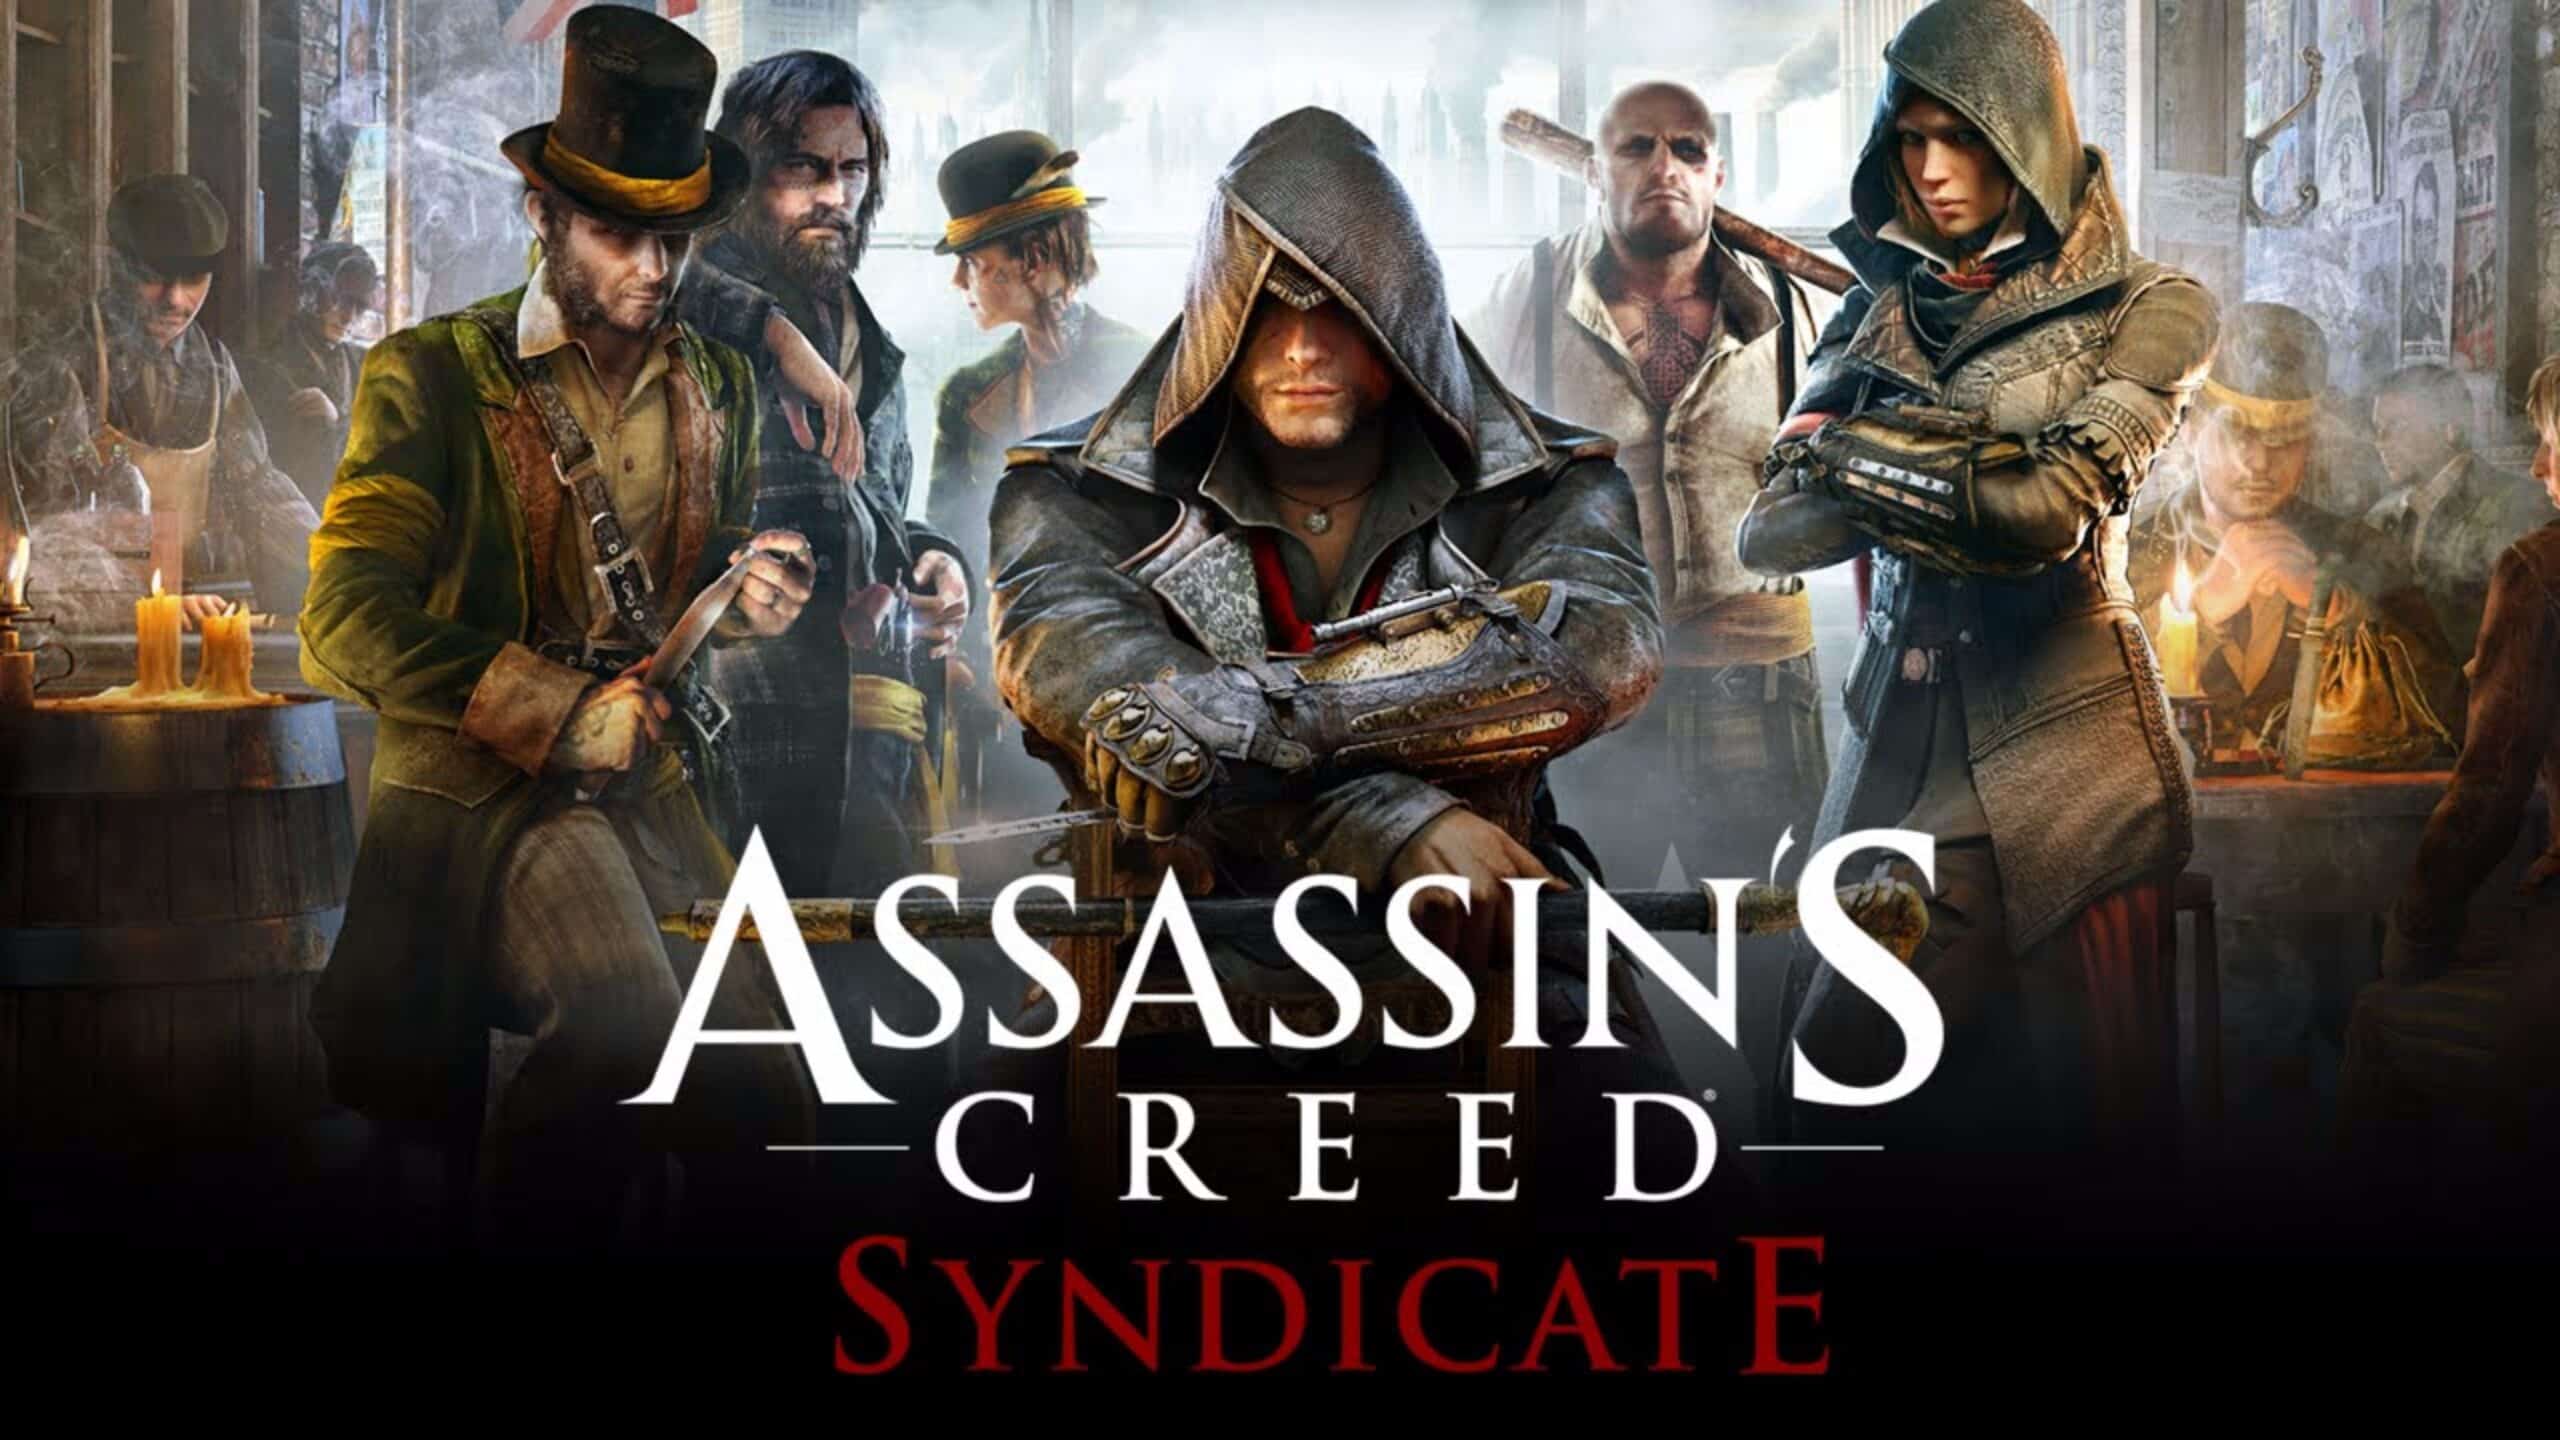 Best Assassins Creed Games - Assassins Creed Syndicate